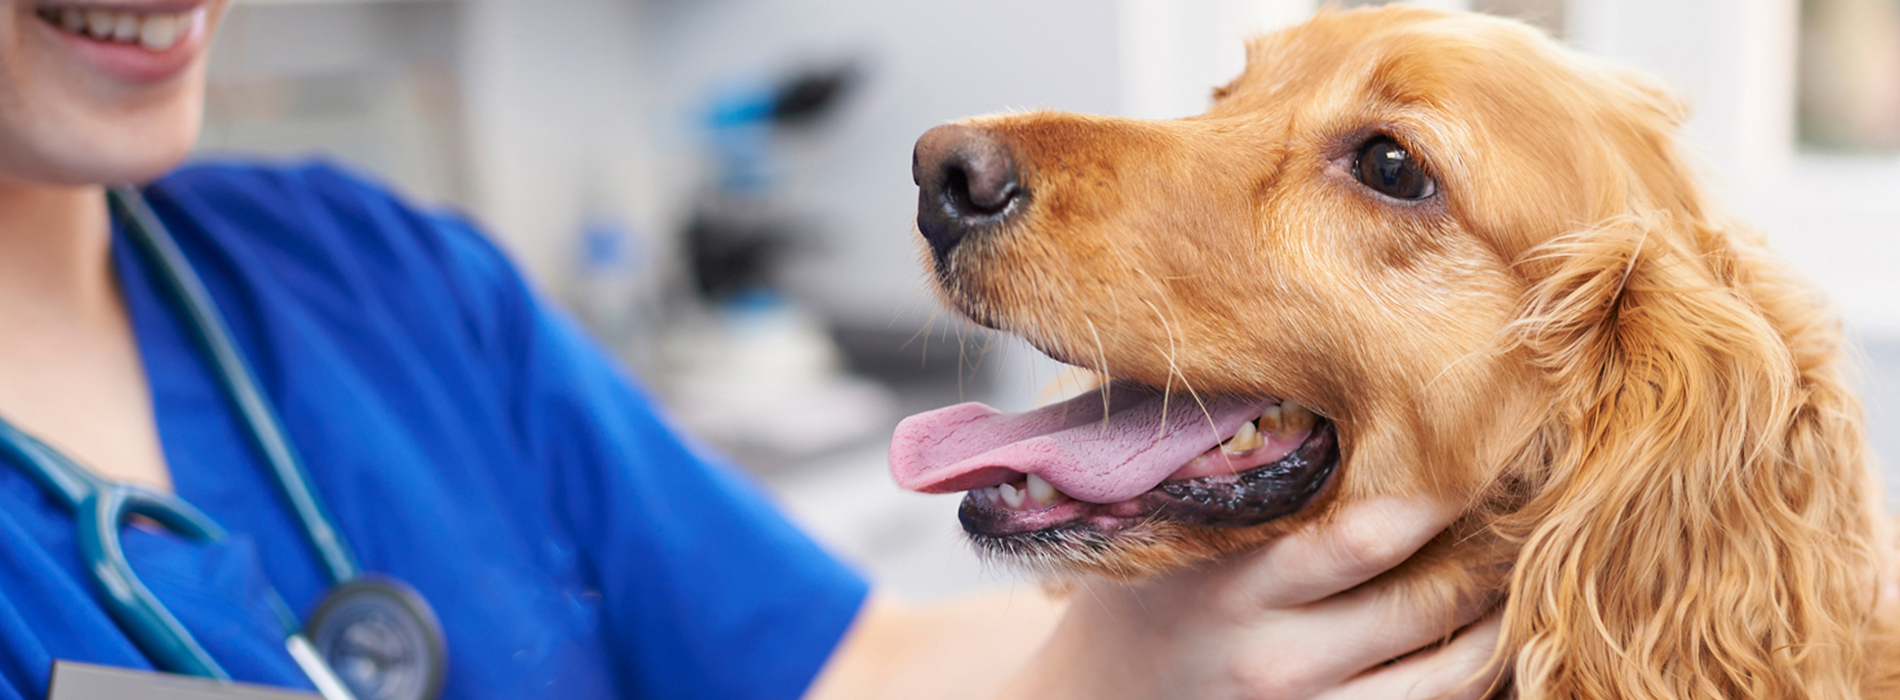 Veterinarian Clinic Lower Macungie - Emergency Vet And Pet Clinic Near Me